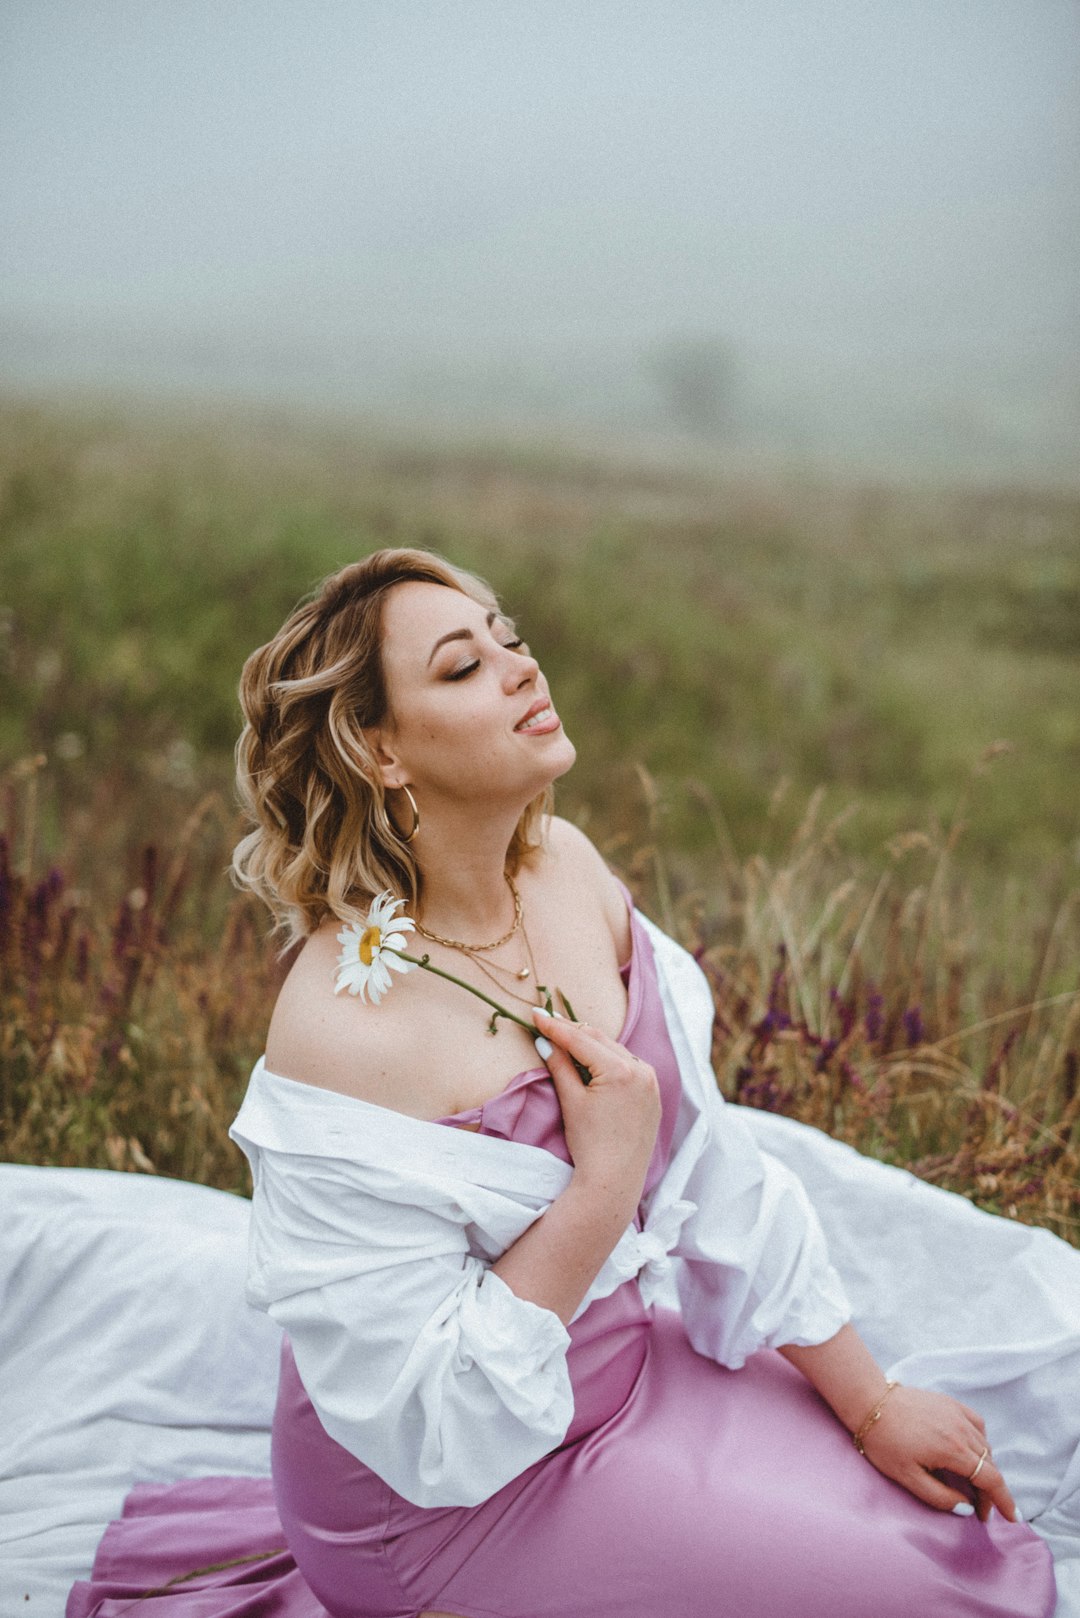 woman in white dress lying on grass field during daytime